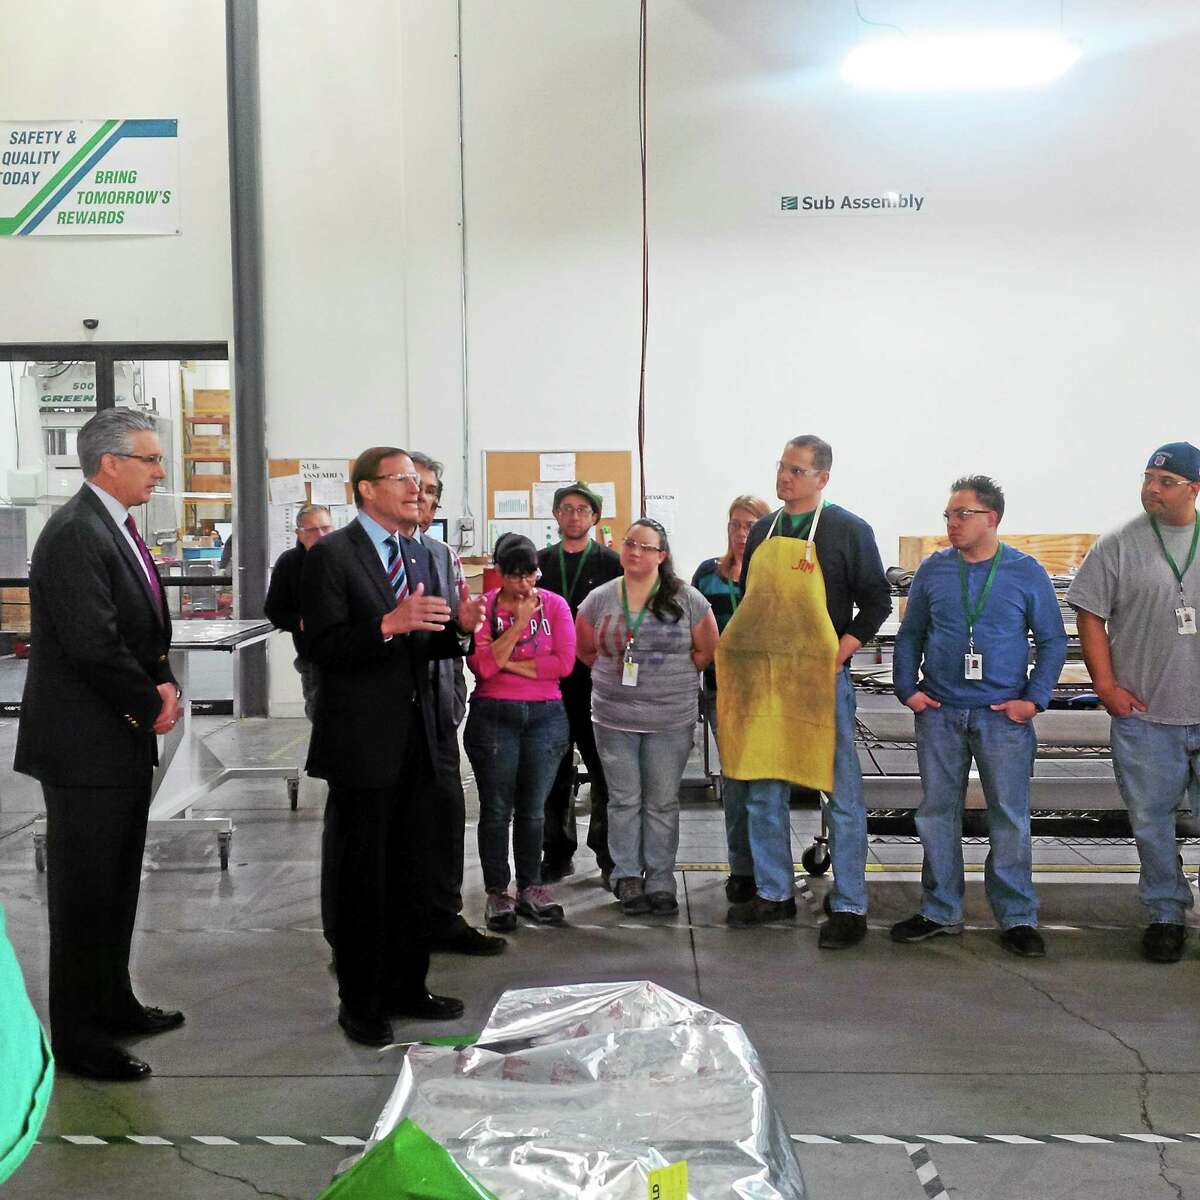 U.S. Sen. Richard Blumenthal speaks to employees at FuelCell Energy in Torrington on Friday.